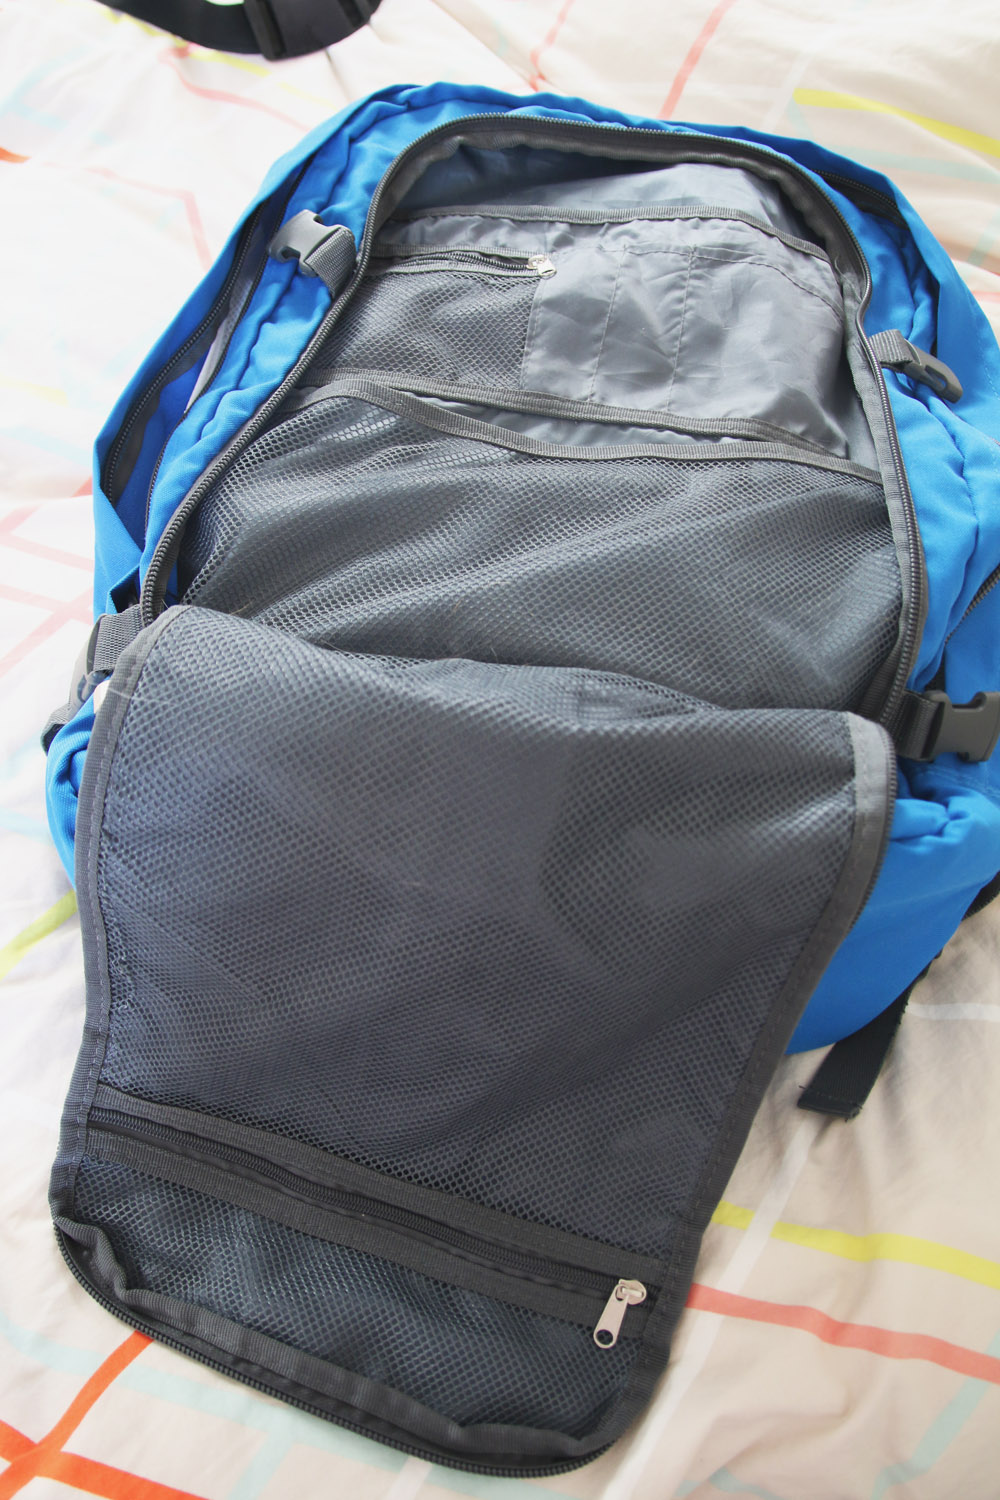 Why you should choose a Cabin Max backpack - Map Made Memories